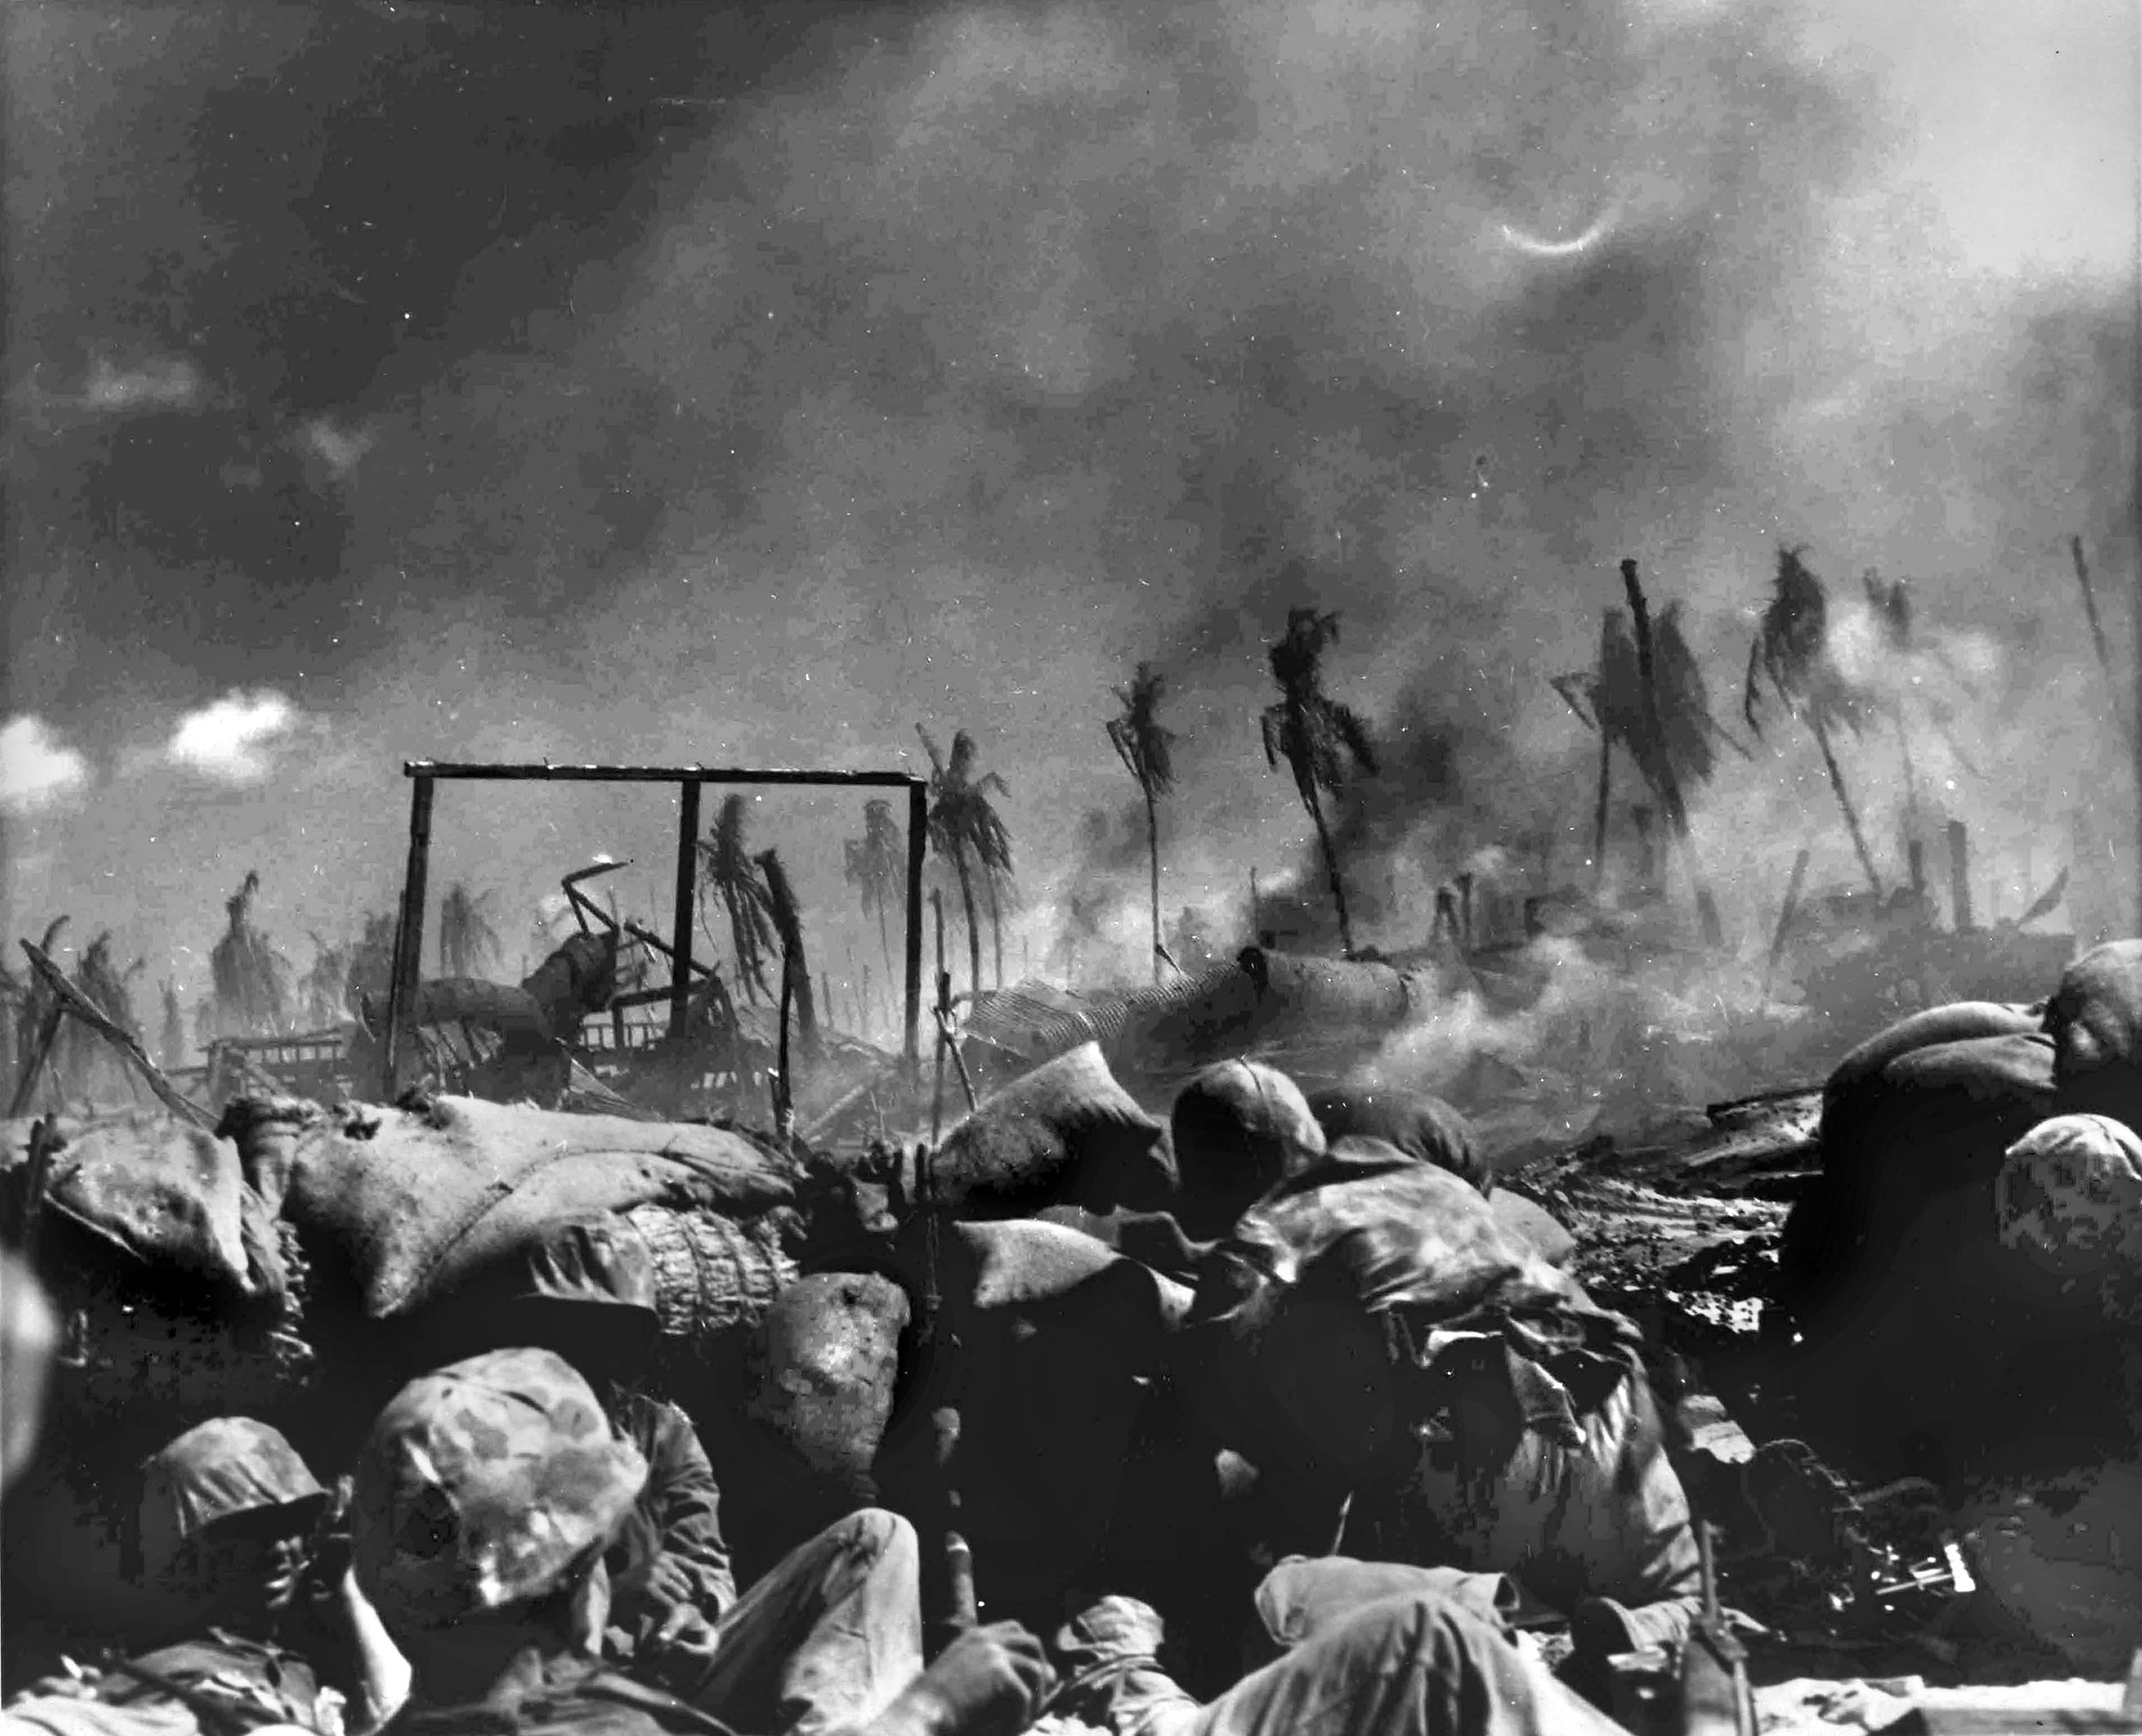 A Marine (center right) tosses a grenade at a Japanese position while his buddies prepare to make contact with the enemy, just a few yards away. 